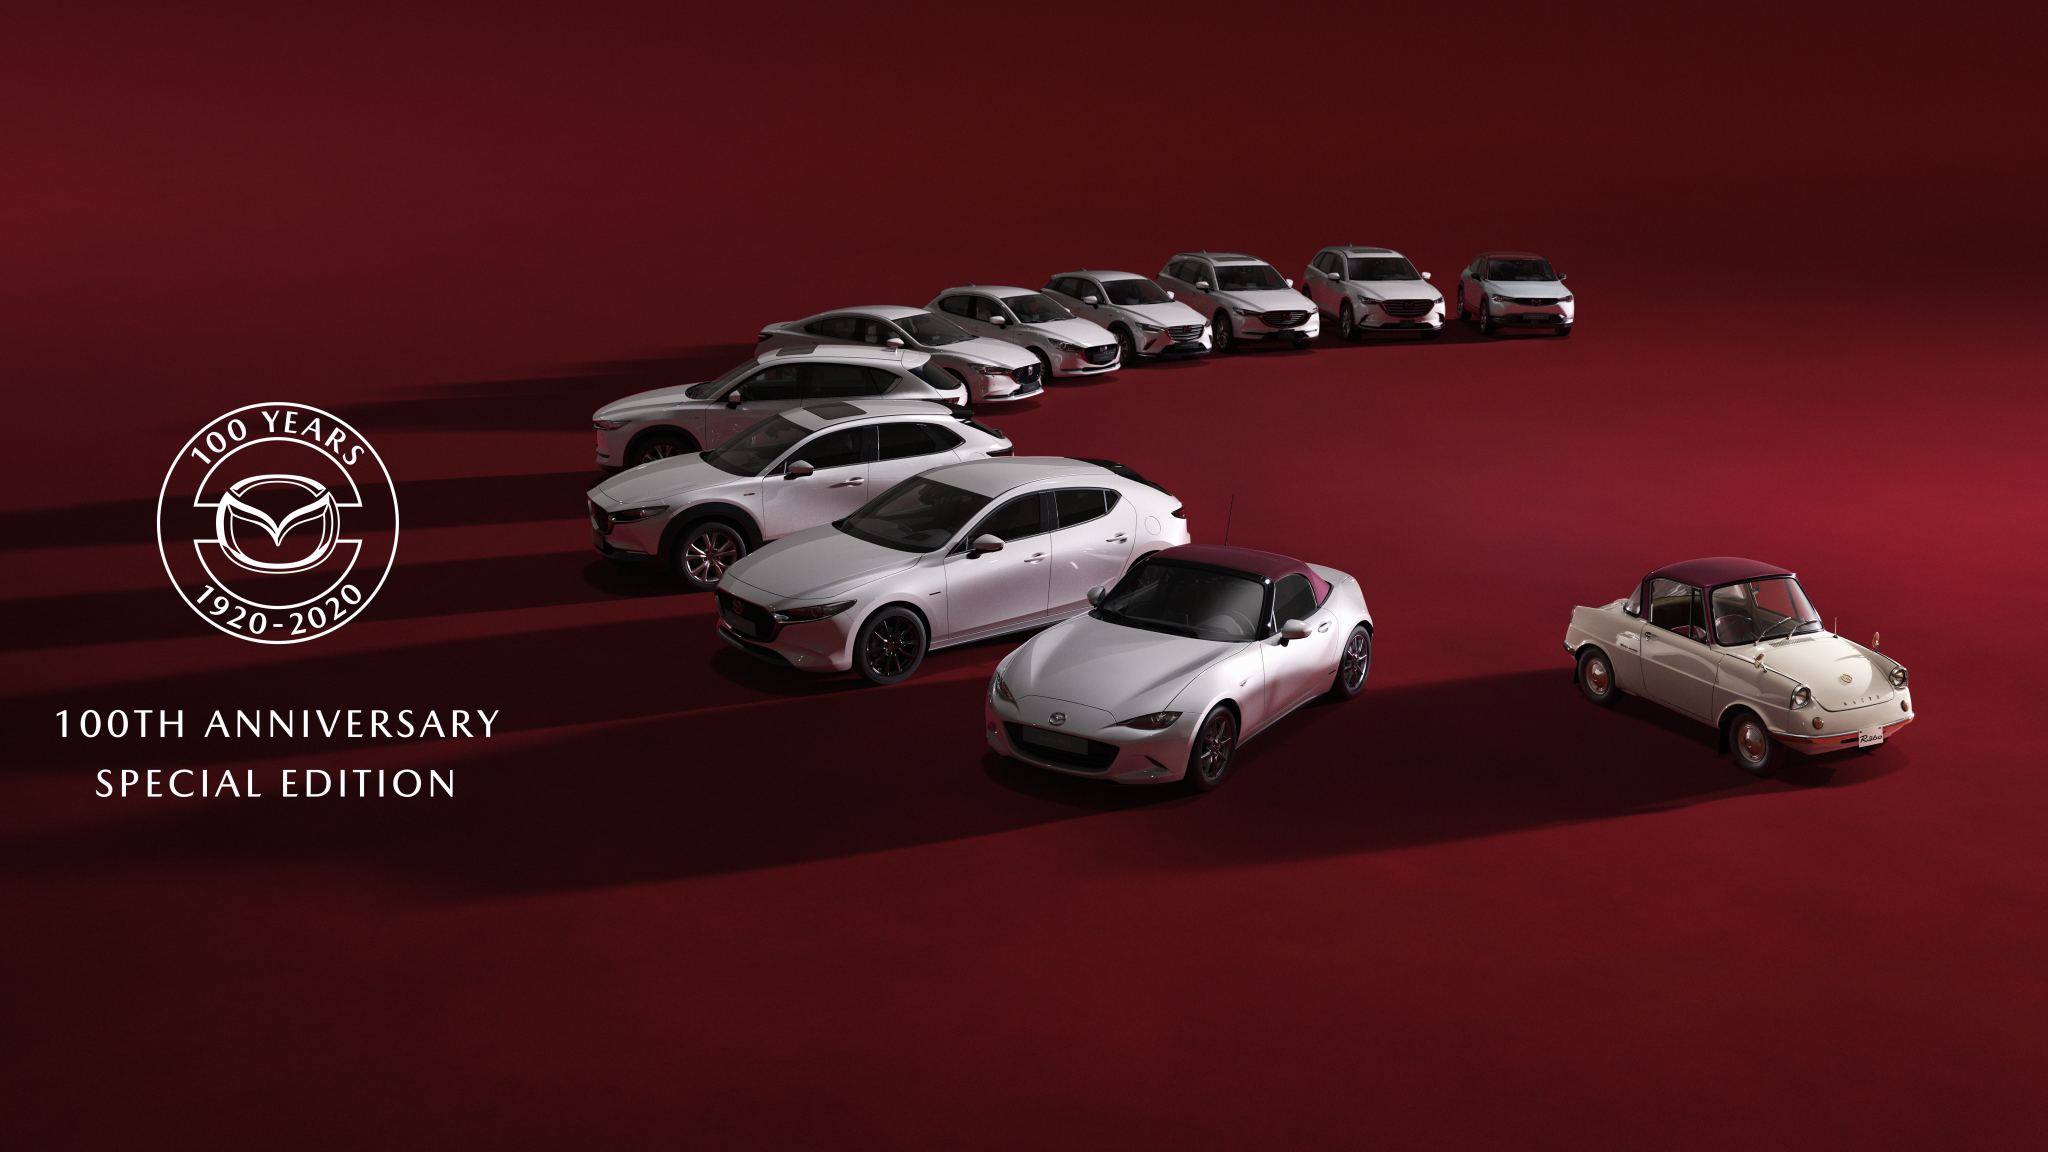 Mazda Celebrates Centennial with Anniversary Special Edition Models | THE SHOP